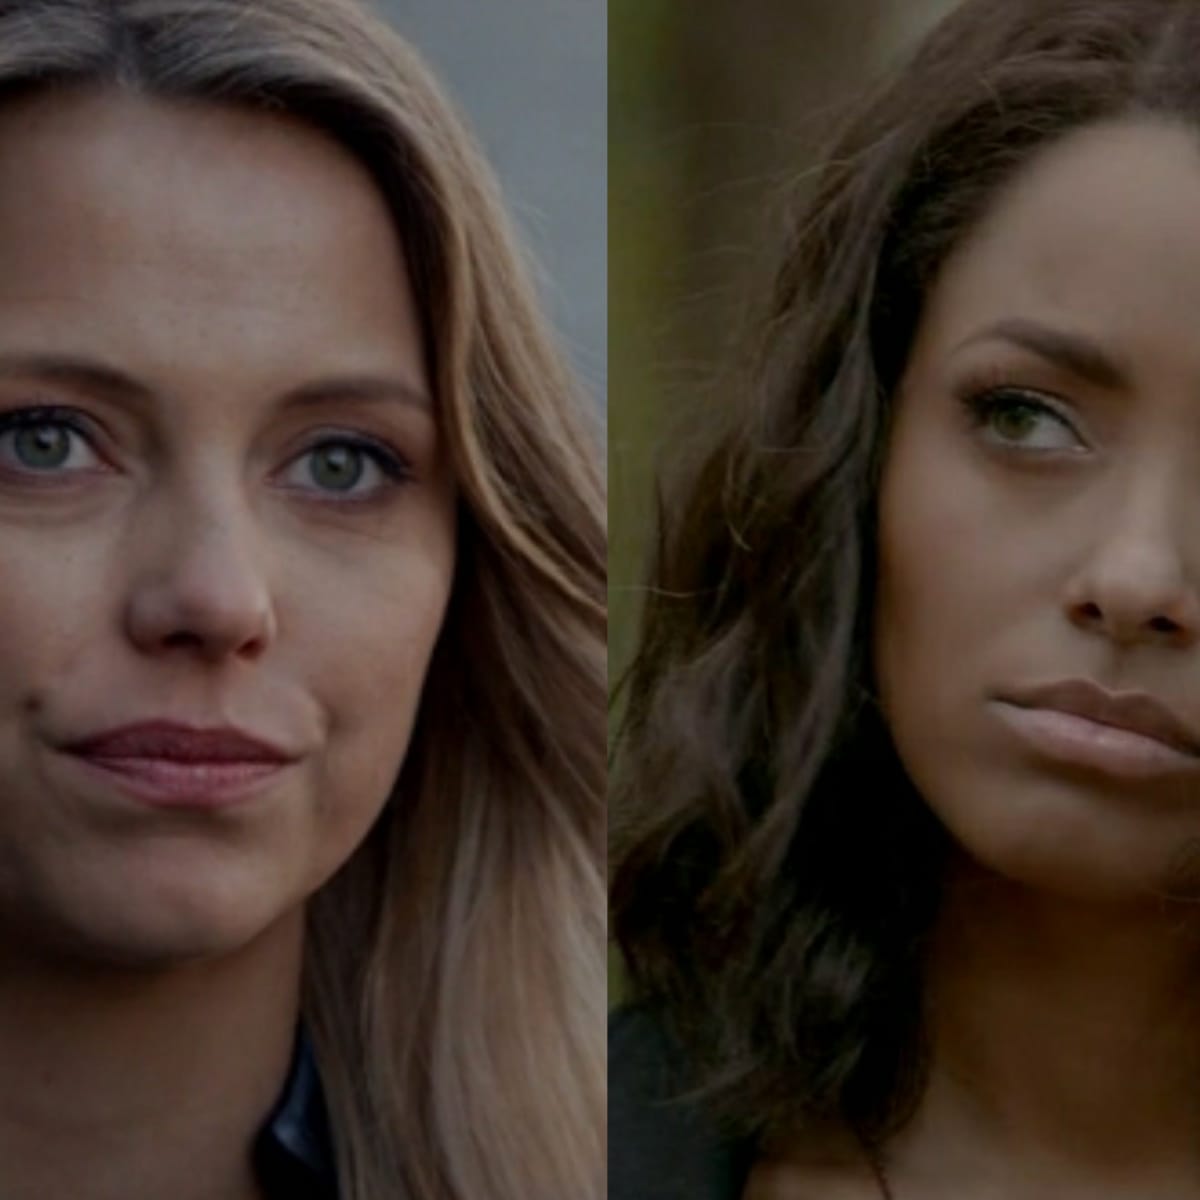 Who Is The Strongest Mikaelson Sibling? - HubPages